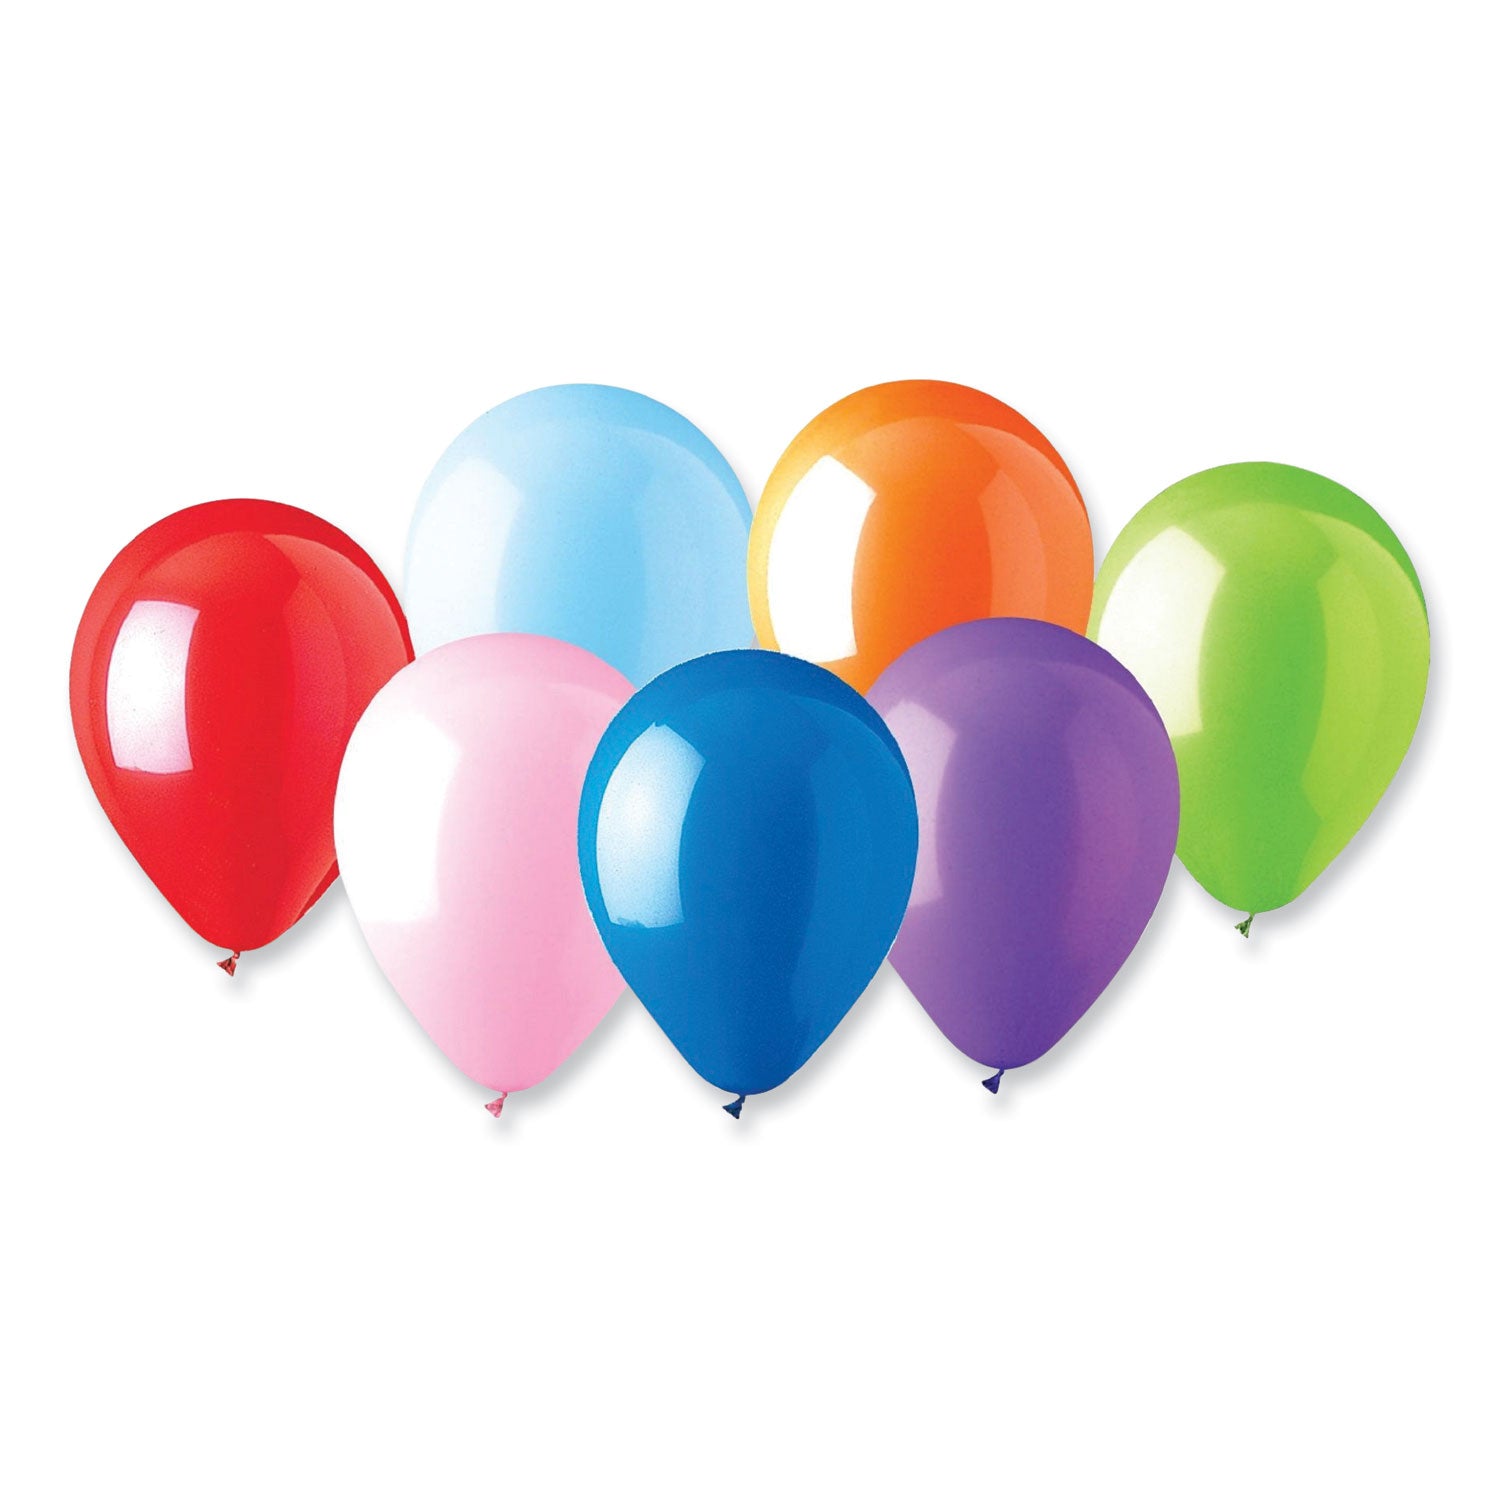 party-loons-helium-quality-latex-balloons-assorted-colors-100-pack_tbl1200 - 2